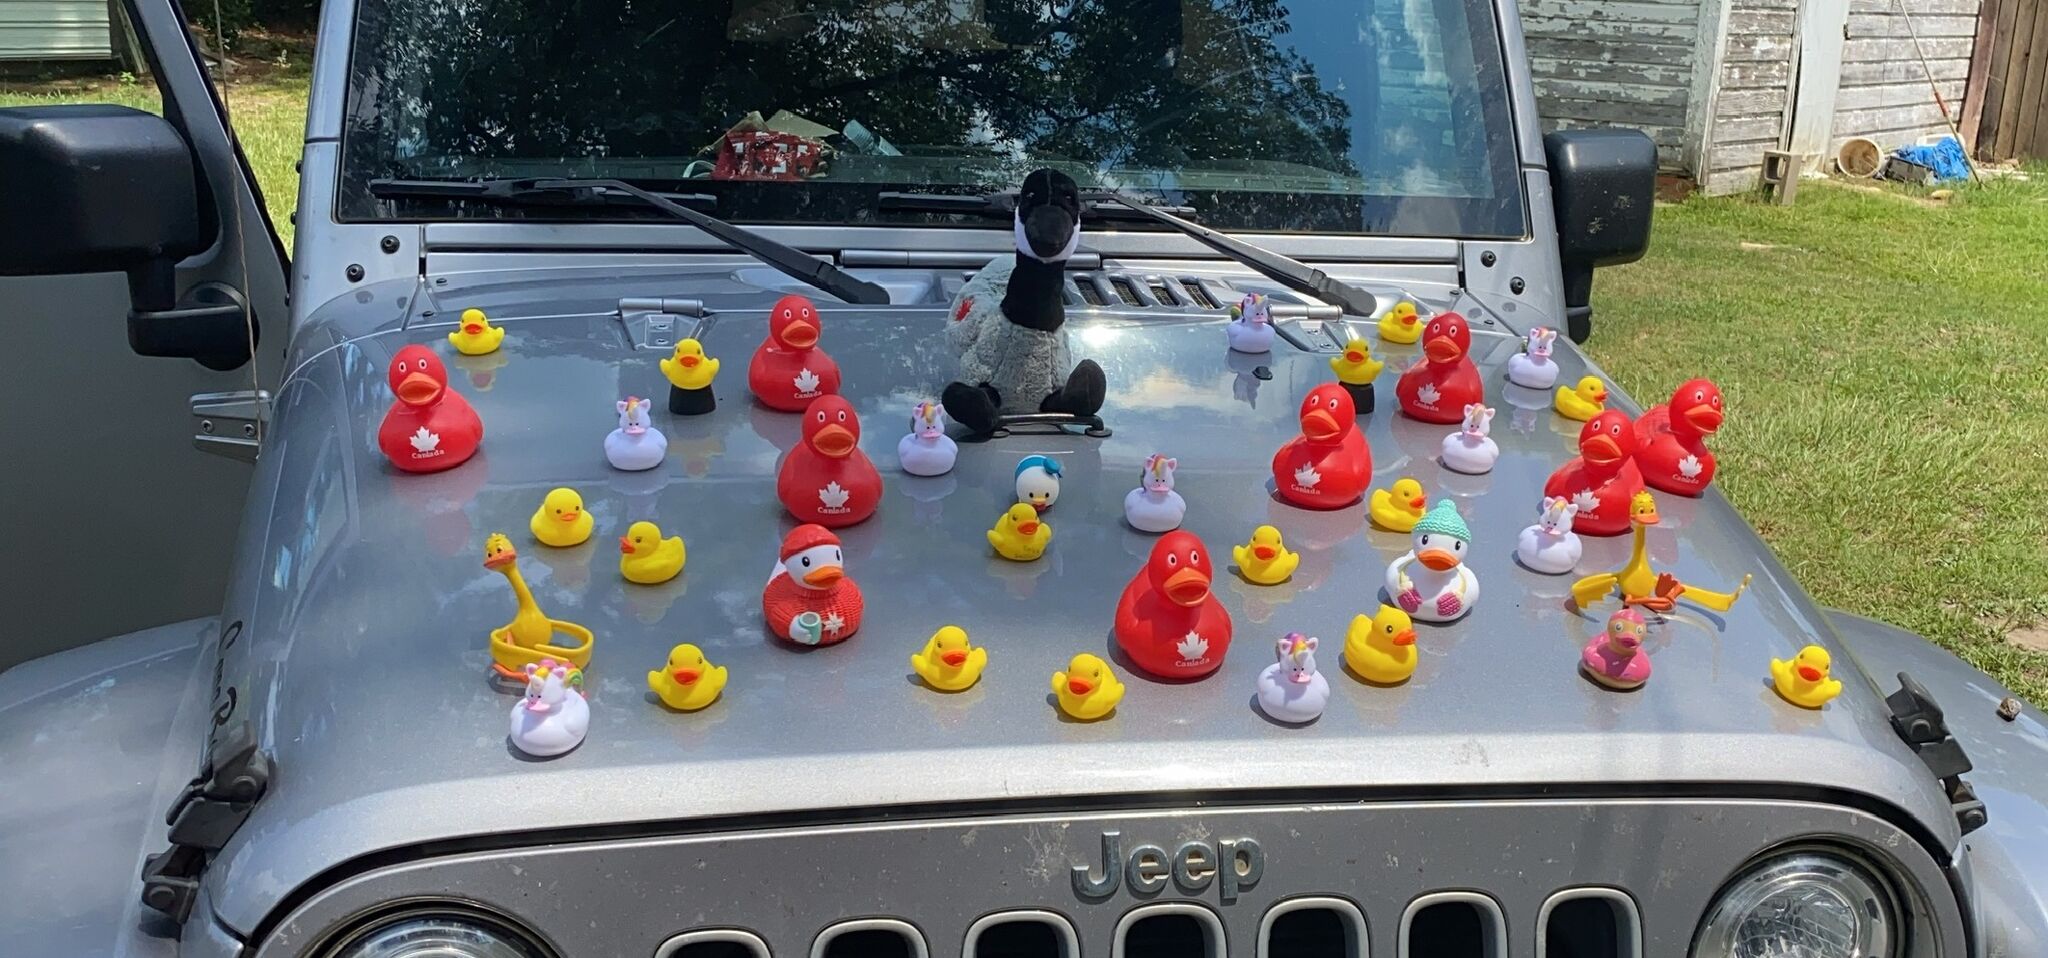 Jeep ducks: The story behind the wholesome viral trend